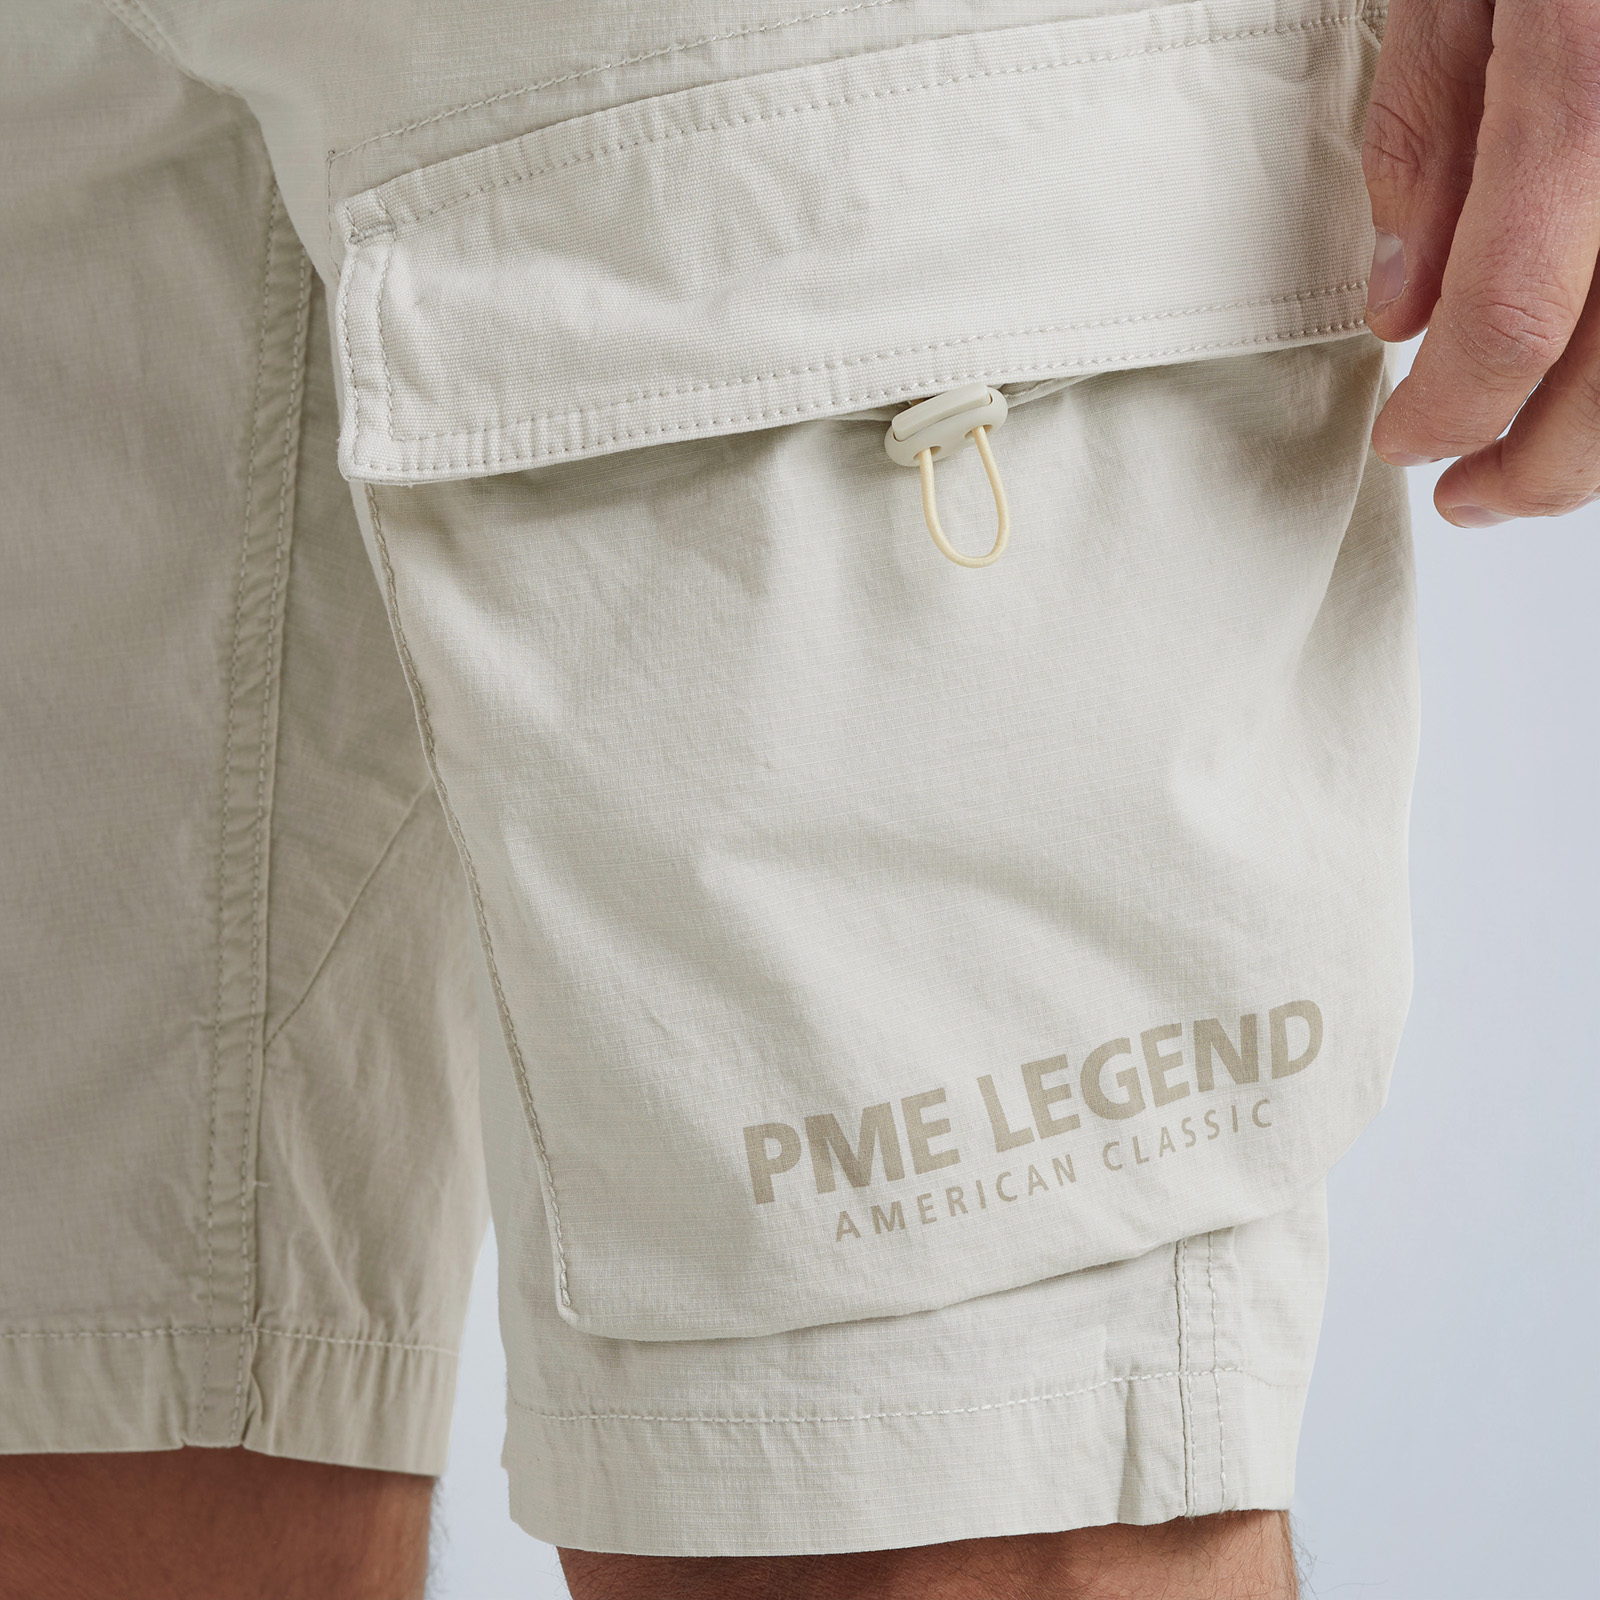 PME LEGEND | Wingtip Short | returns and shipping Free Cargo